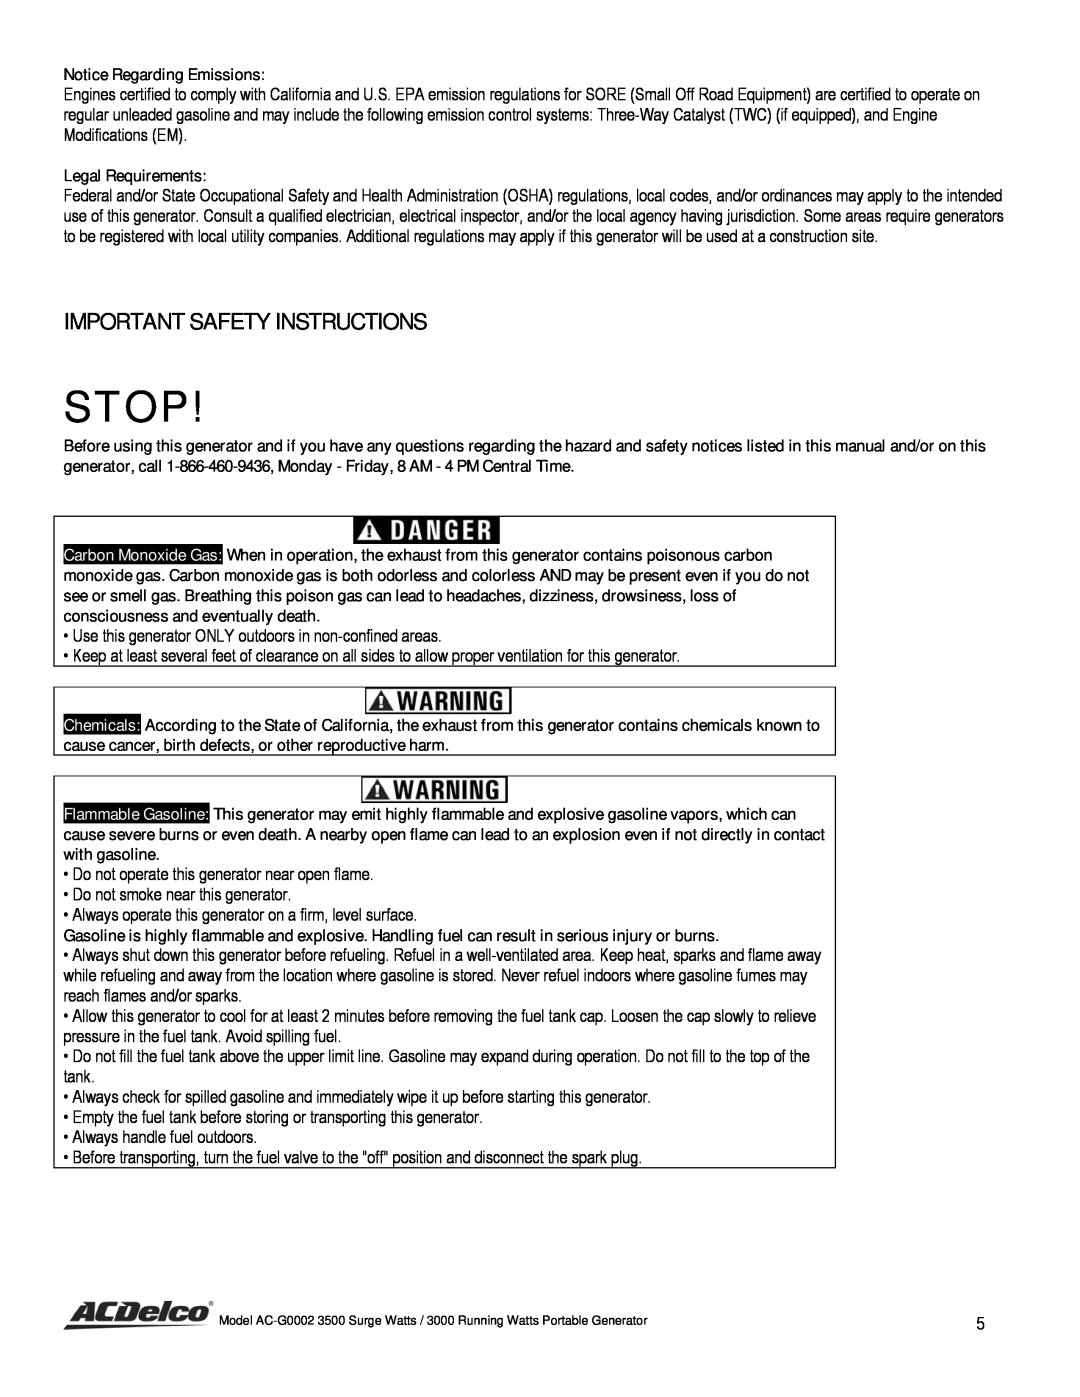 ACDelco AC-G0002 instruction manual Important Safety Instructions, Stop 